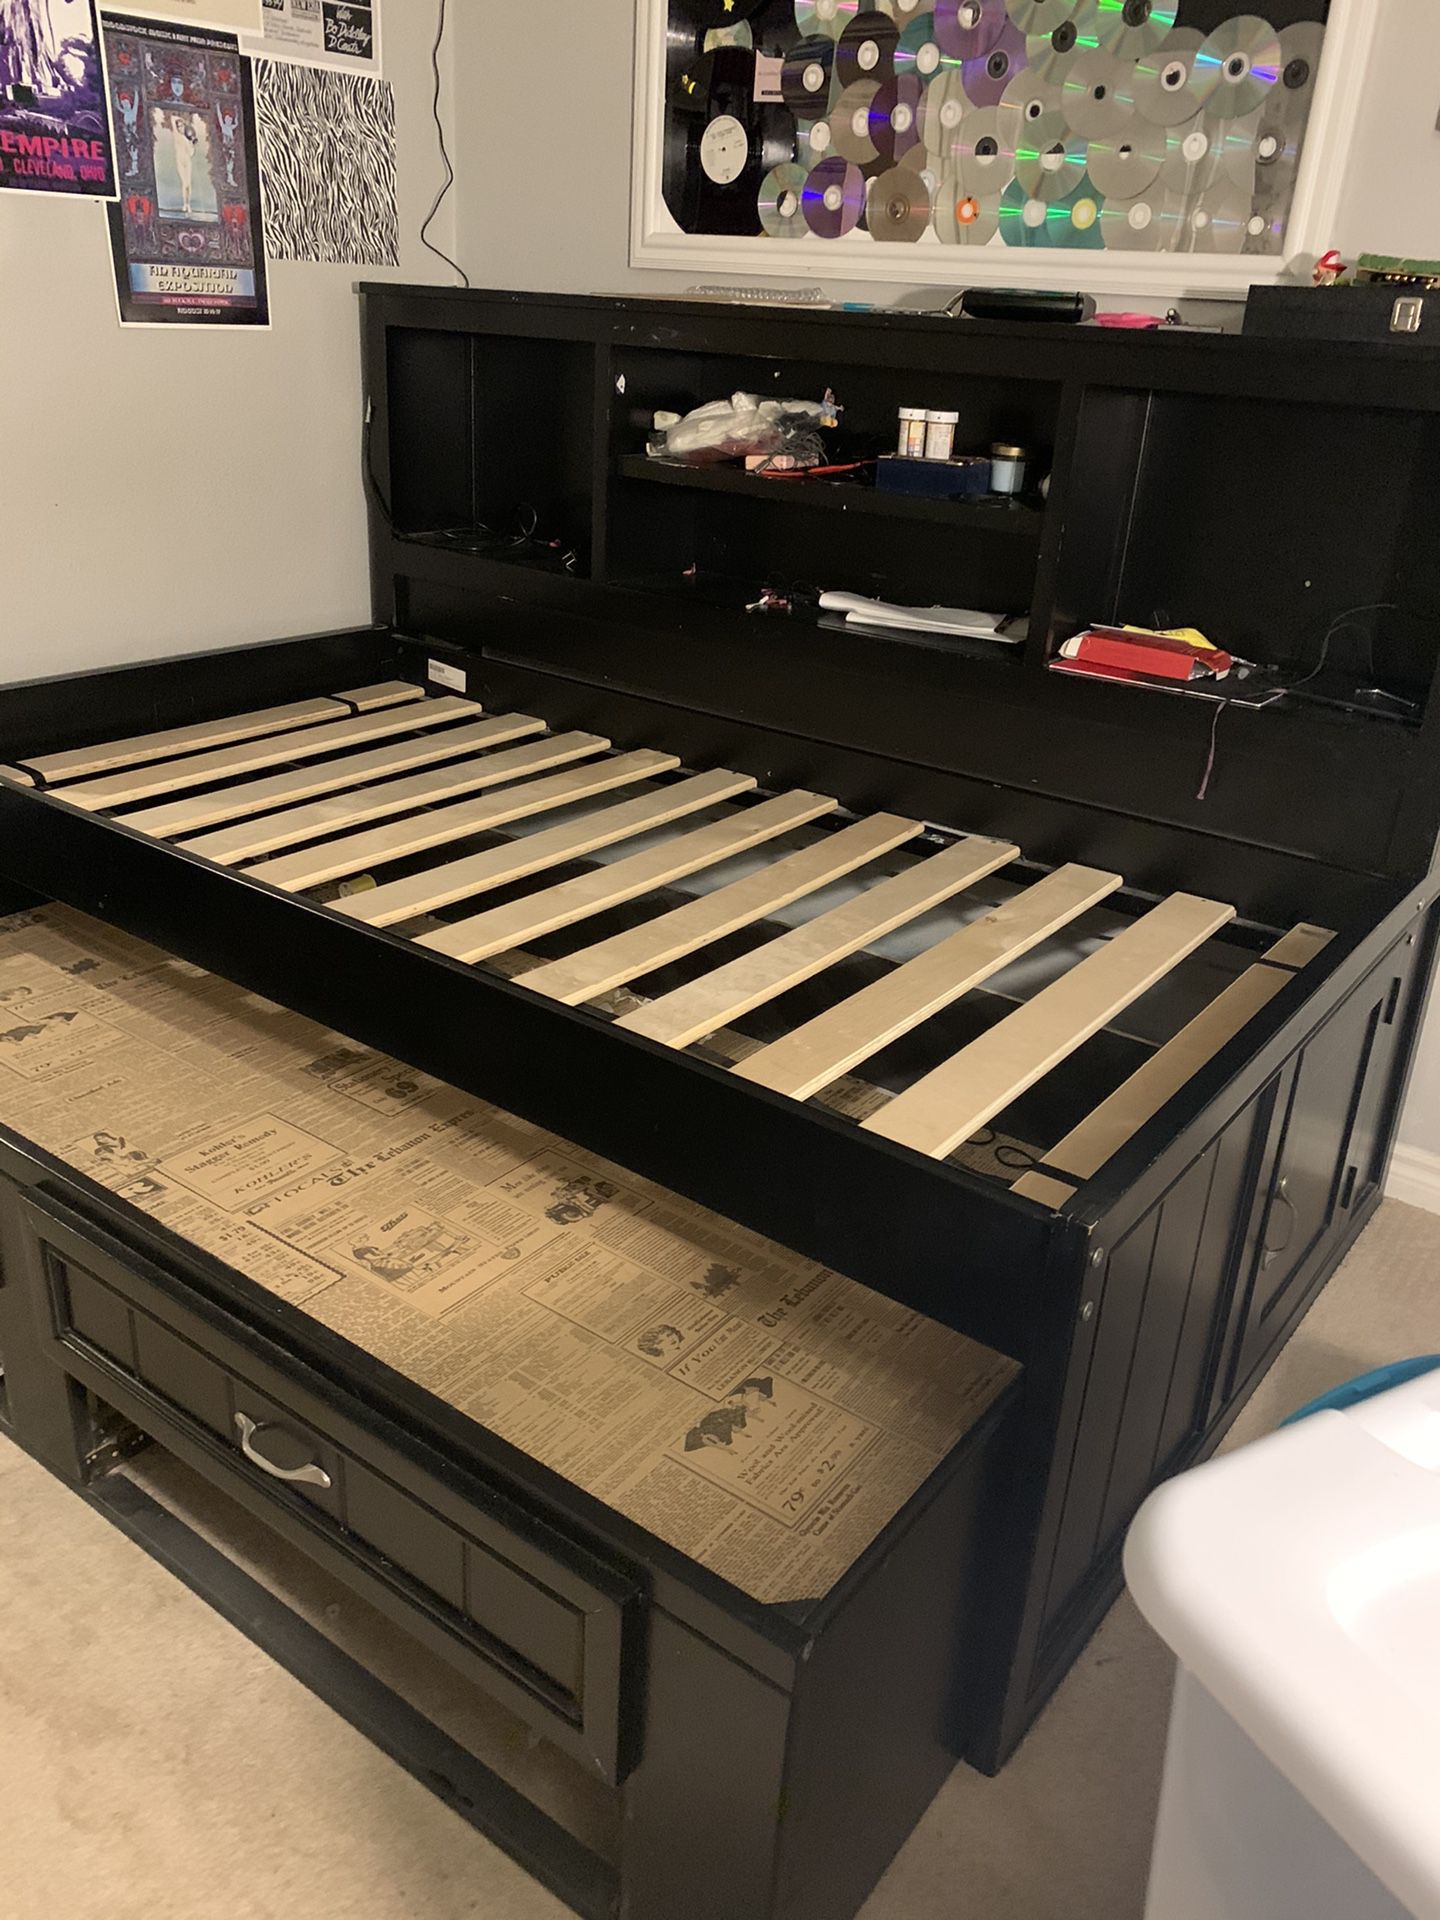 Twin trundle bed.